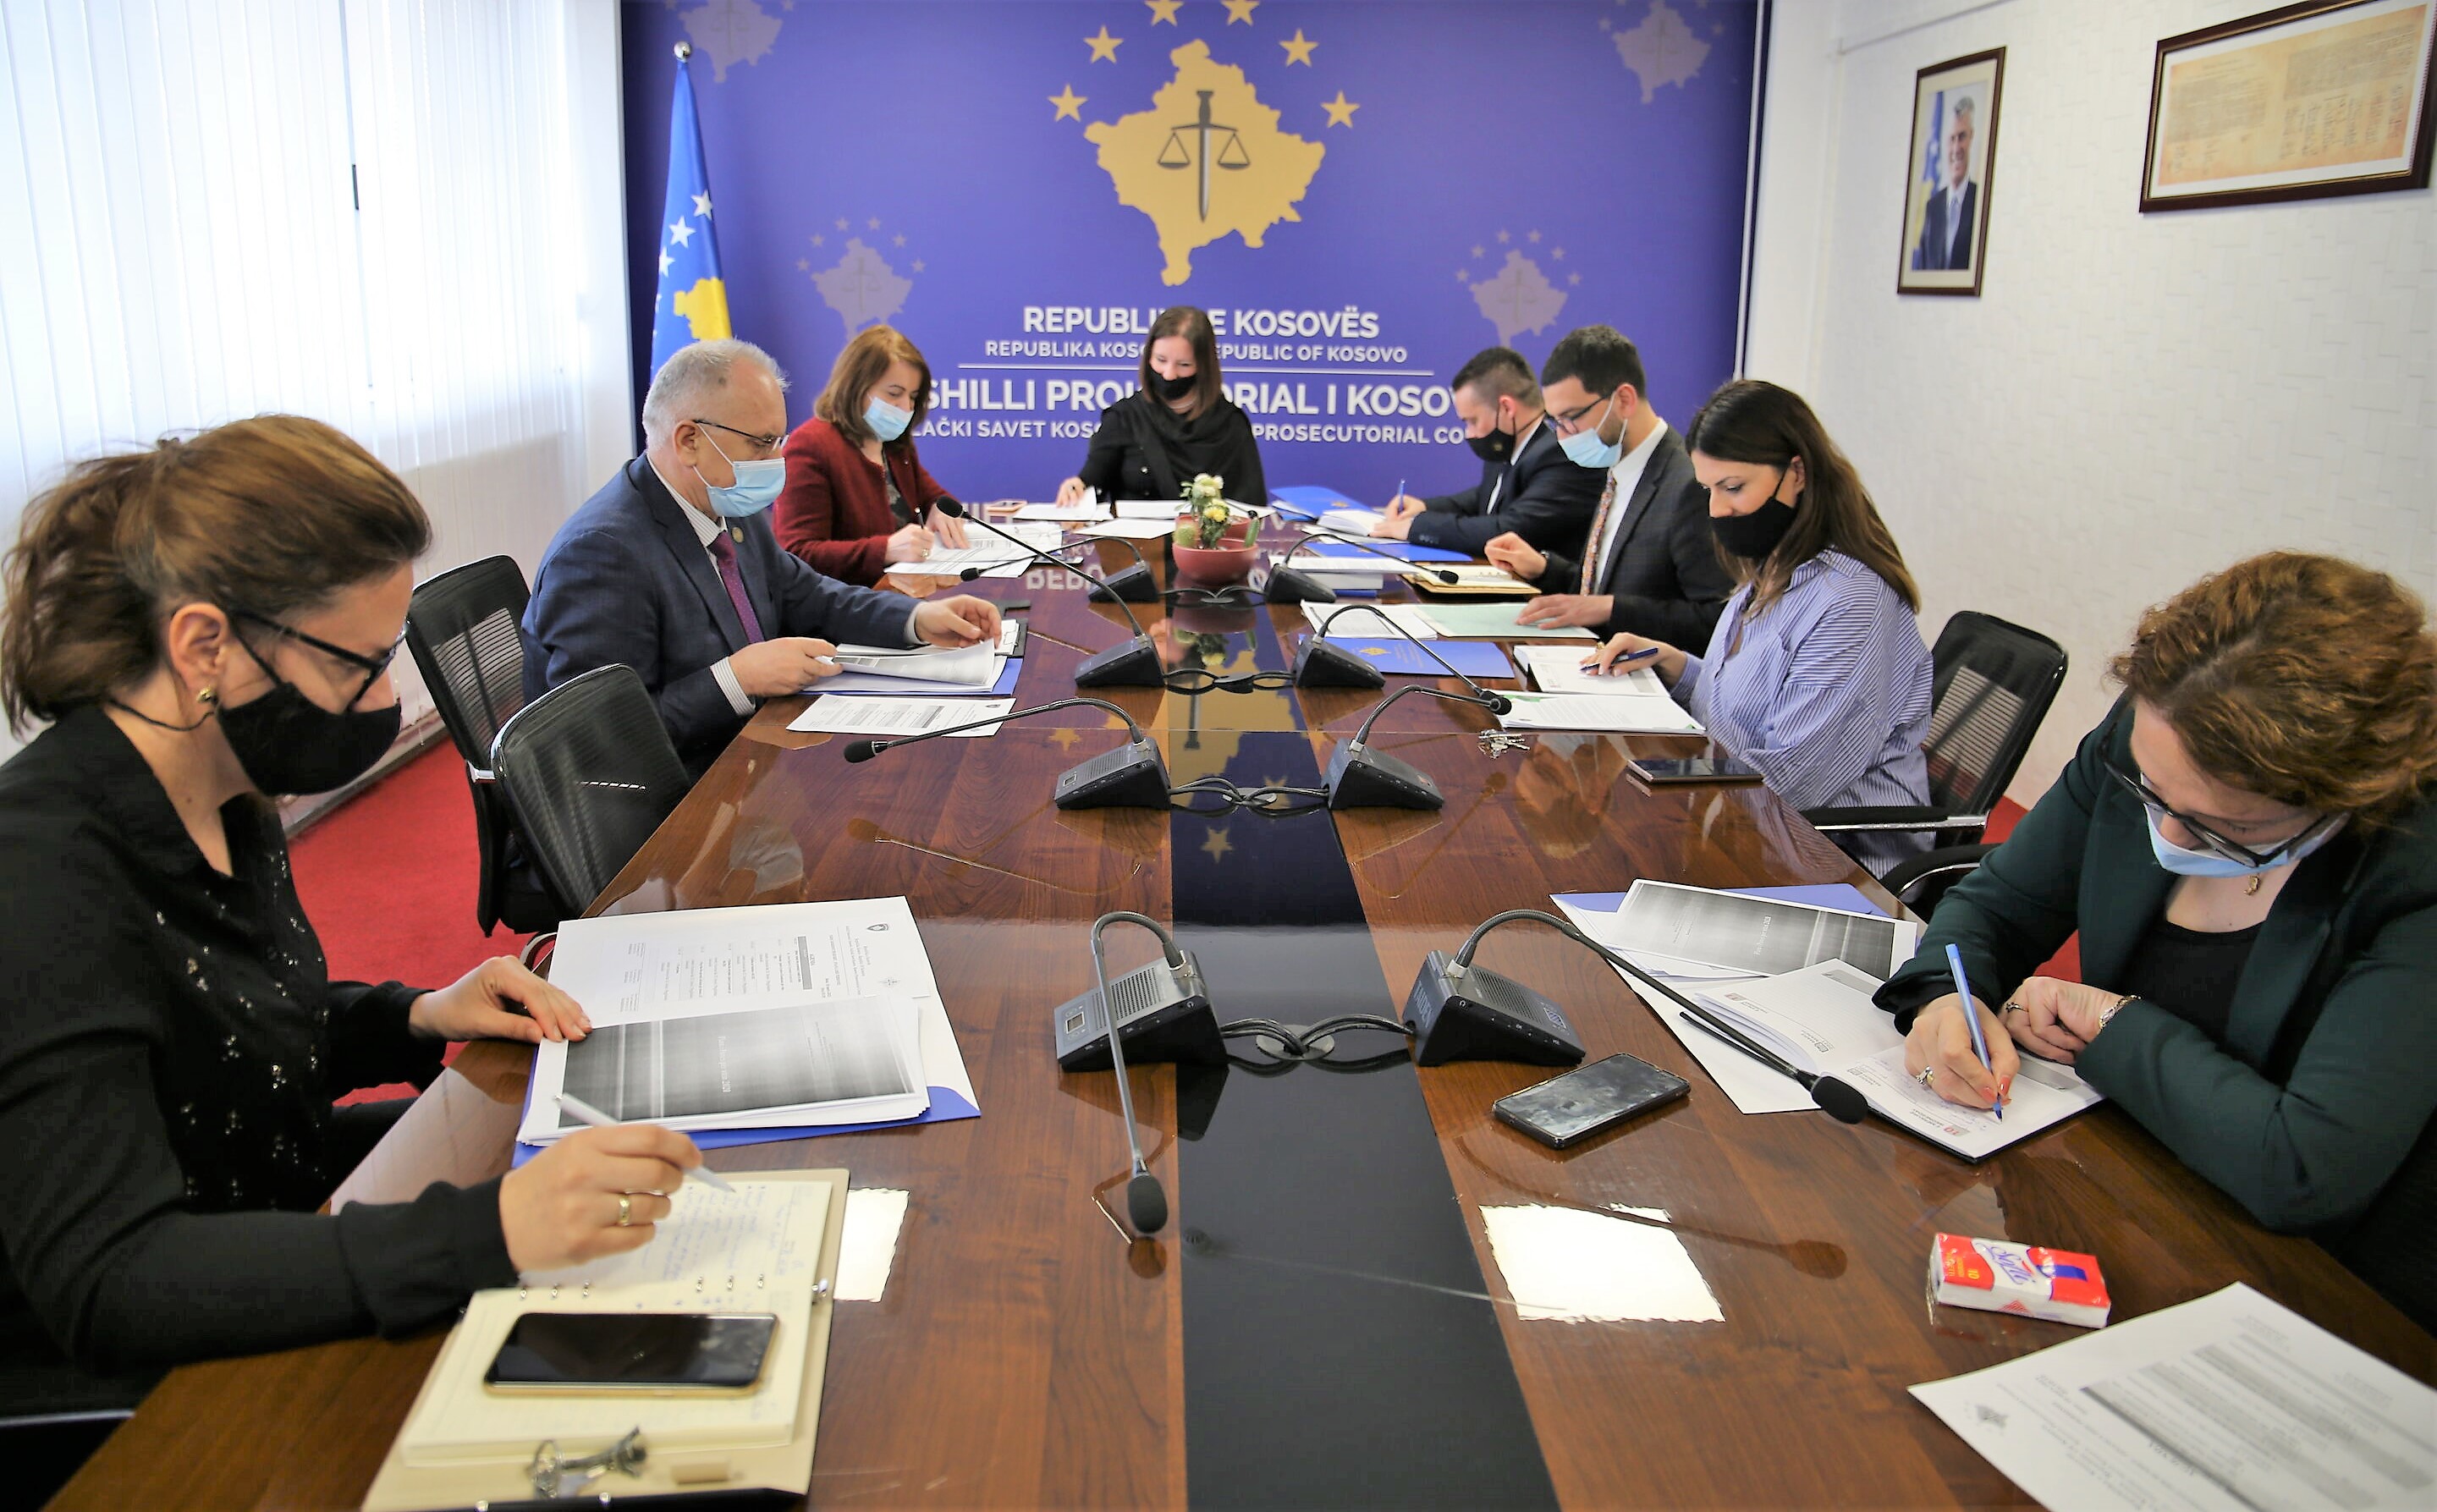 The Committee on Budget, Finance and Personnel holds its constitutive meeting